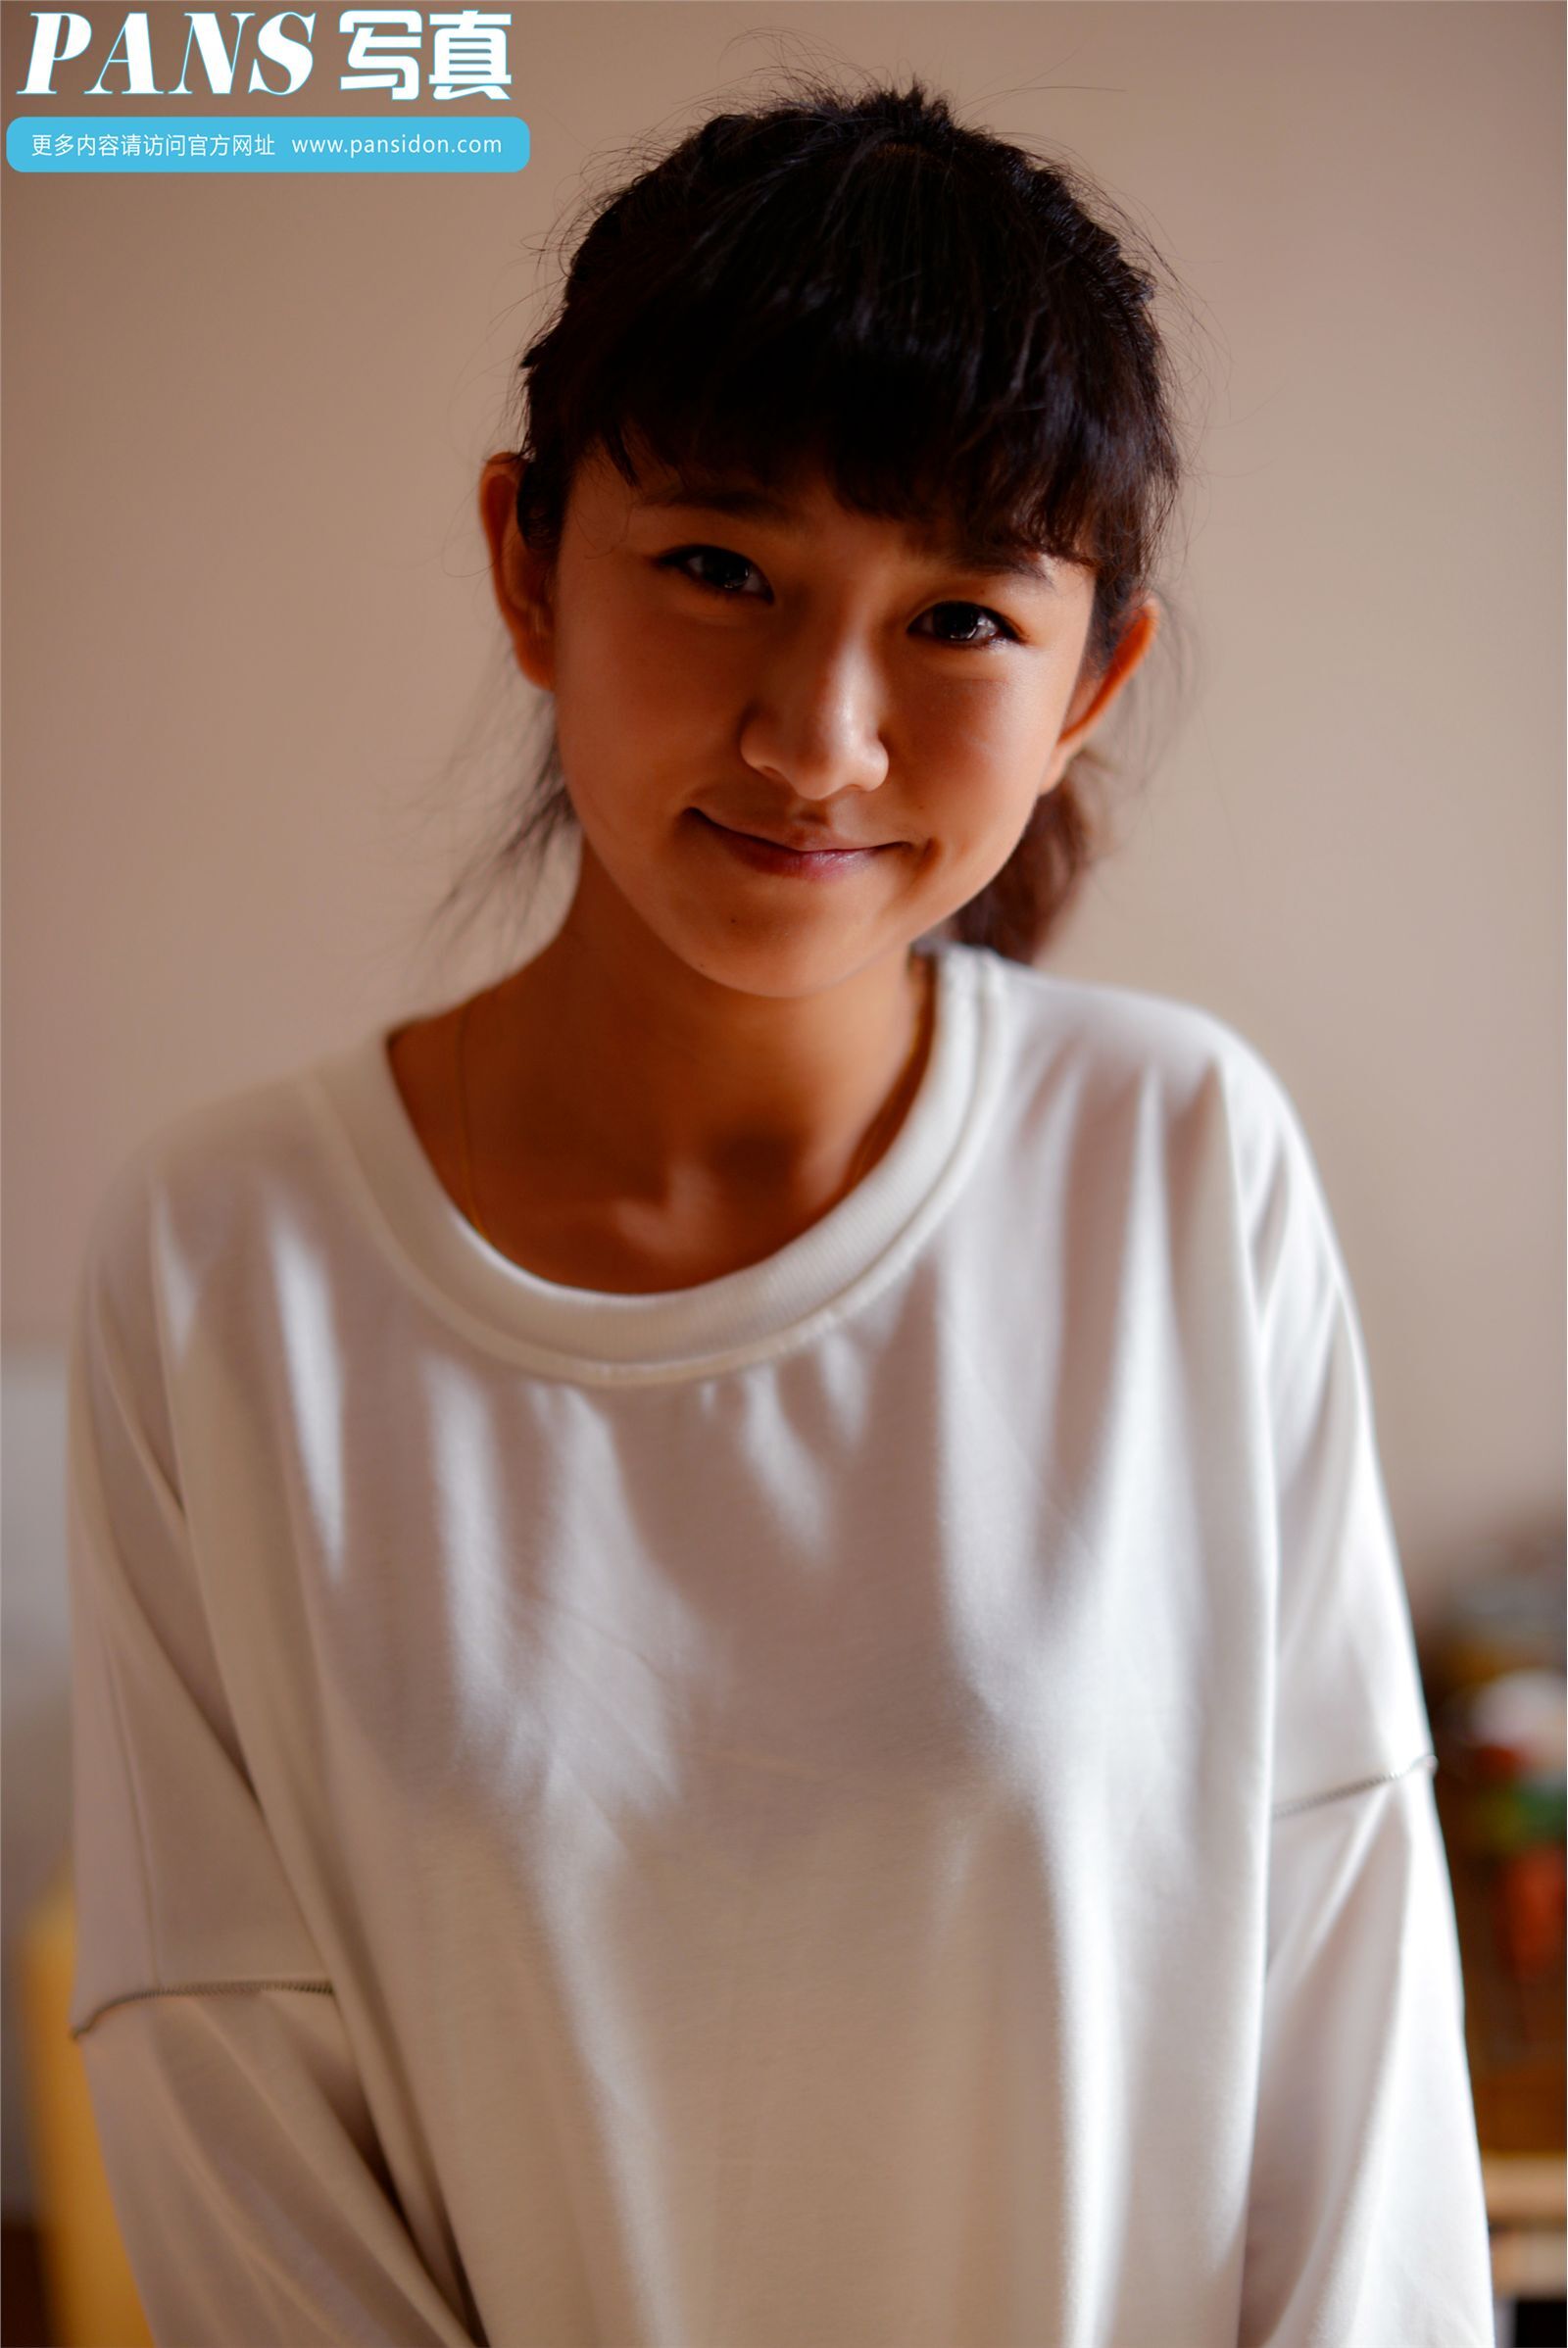 [pans Photo] 2014.09.13 No. new model audition Jiajia